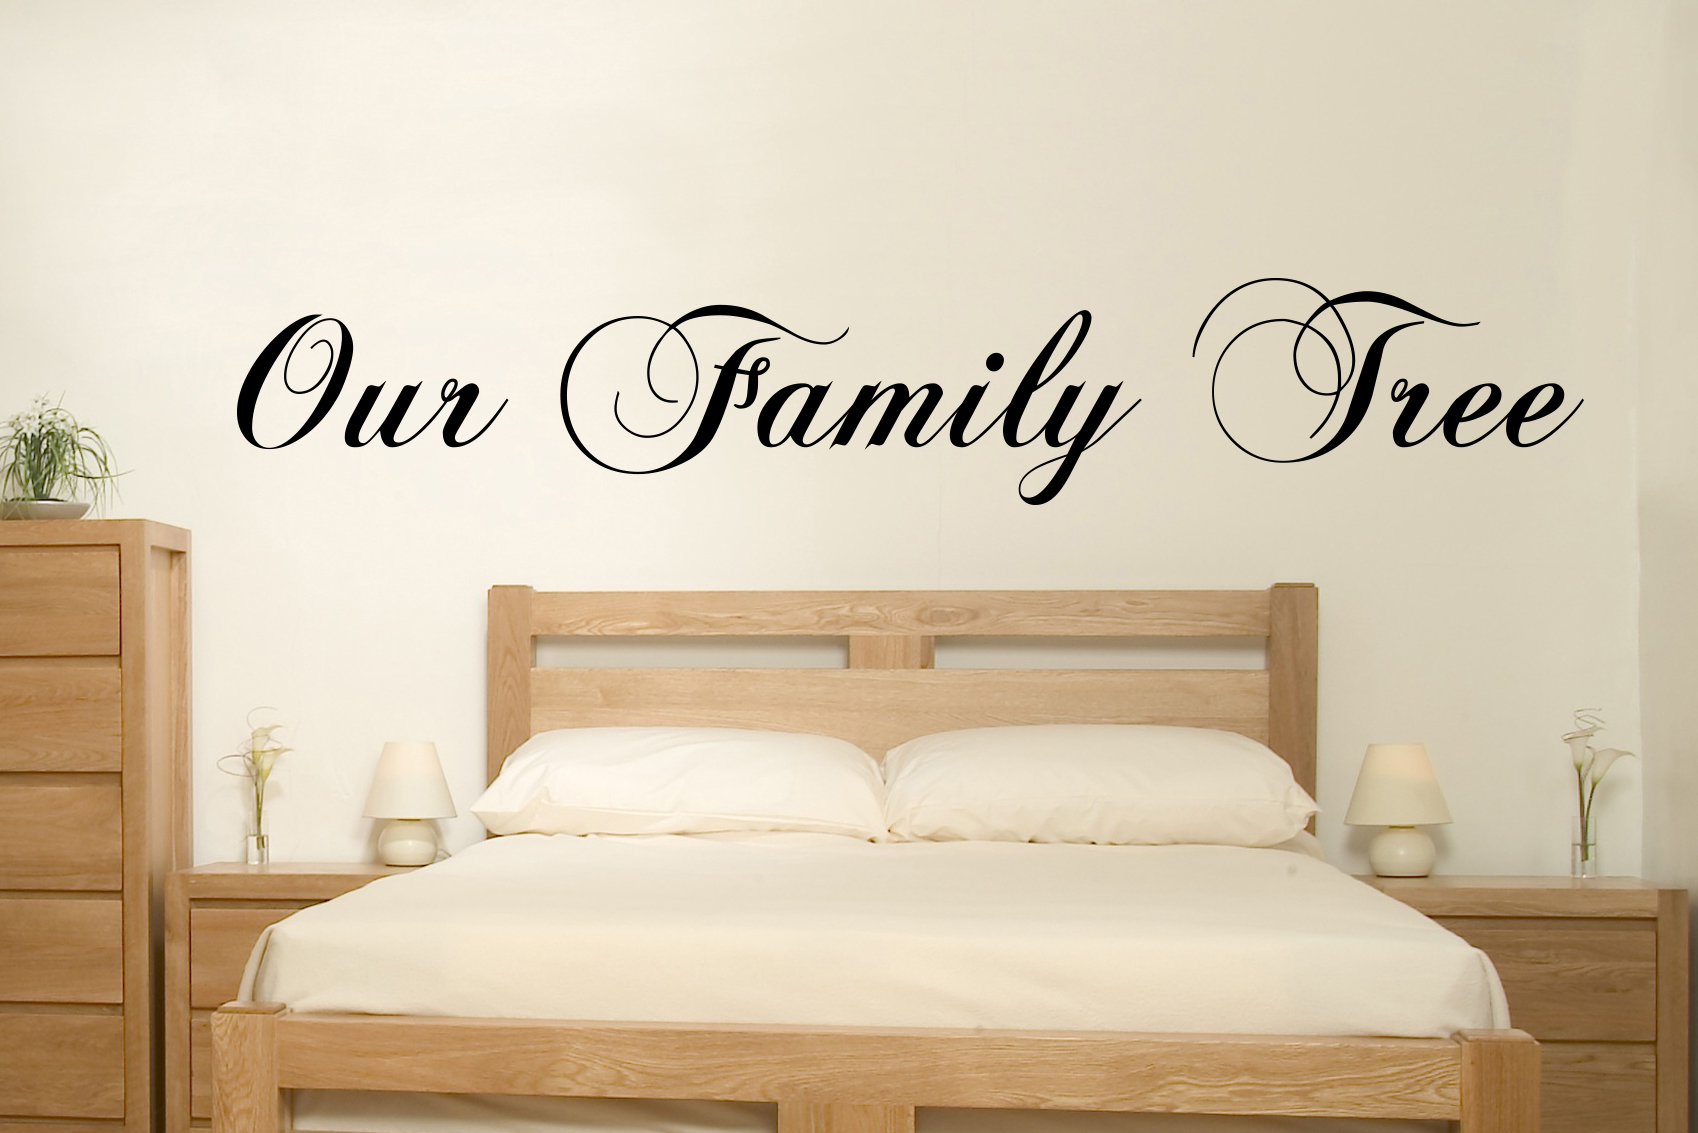 Our Family Tree Wall Decal